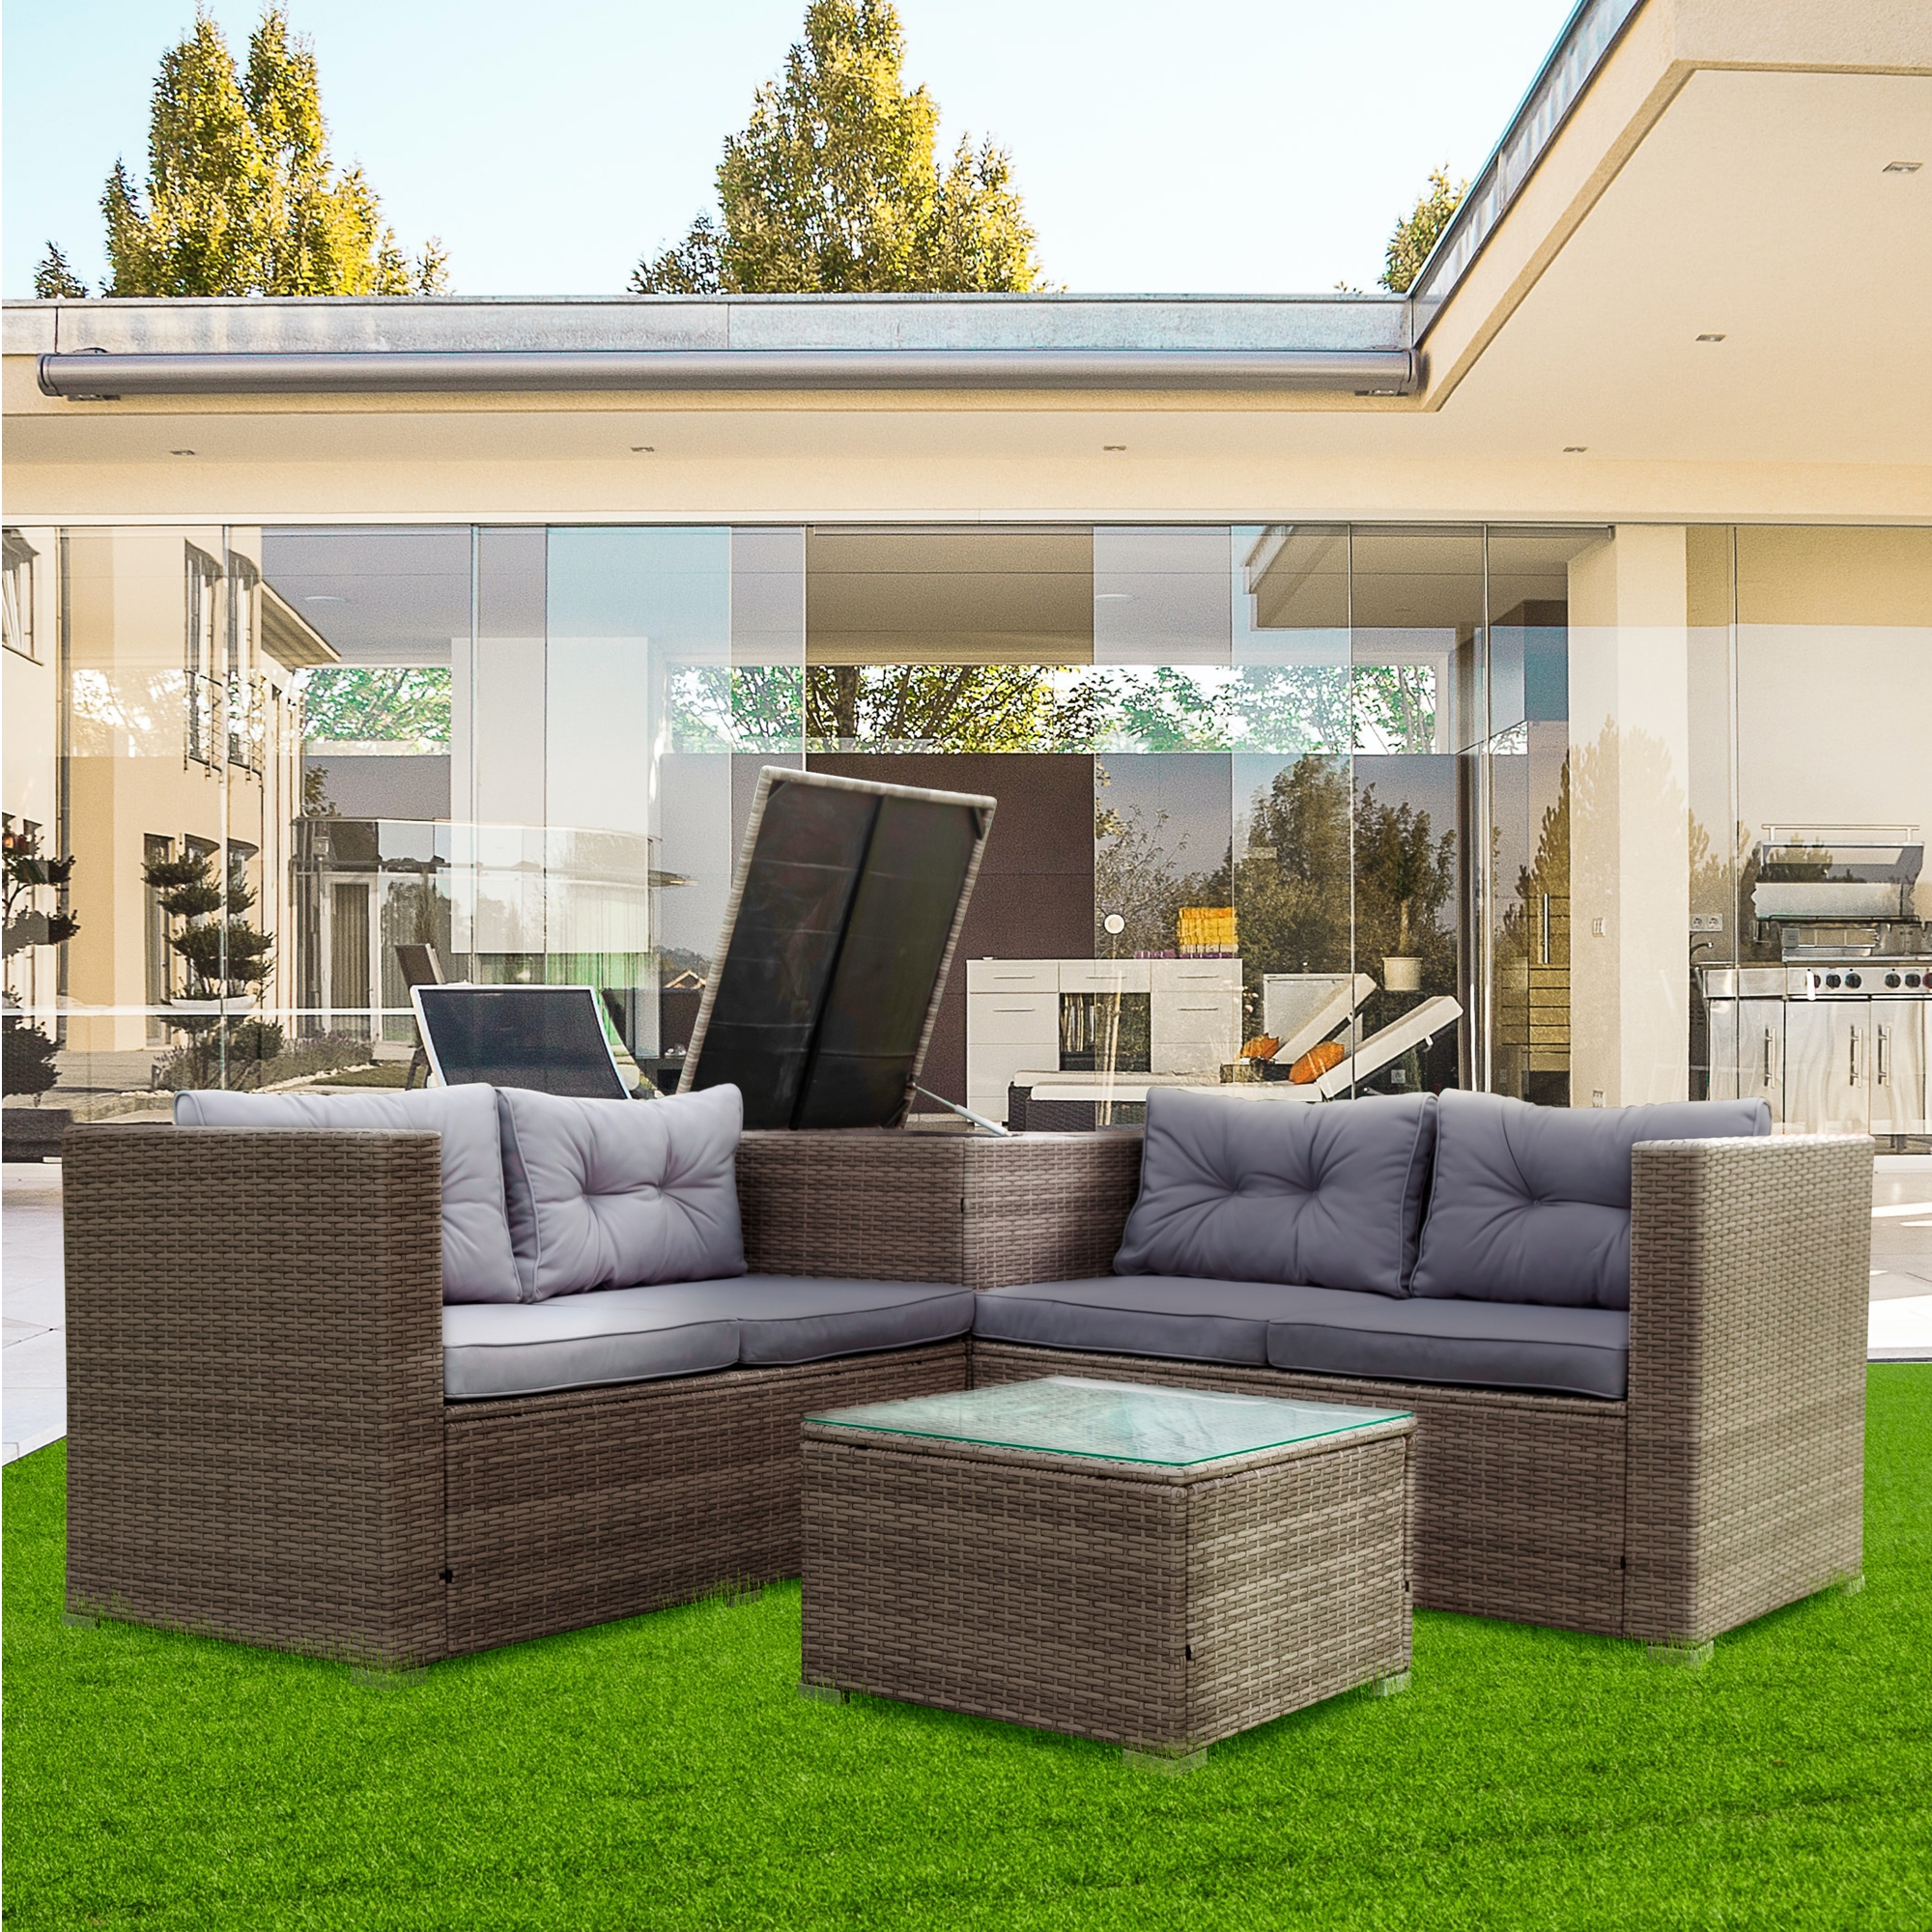 Patio Bistro Dining Chair Furniture Sets, 4 Pieces Patio Furniture Sets with Glass Coffee Table & Storage Box, Leisure Chair Conversation Set with Soft Cushion for Garden Poolside, Grey, SS2174 - image 2 of 9